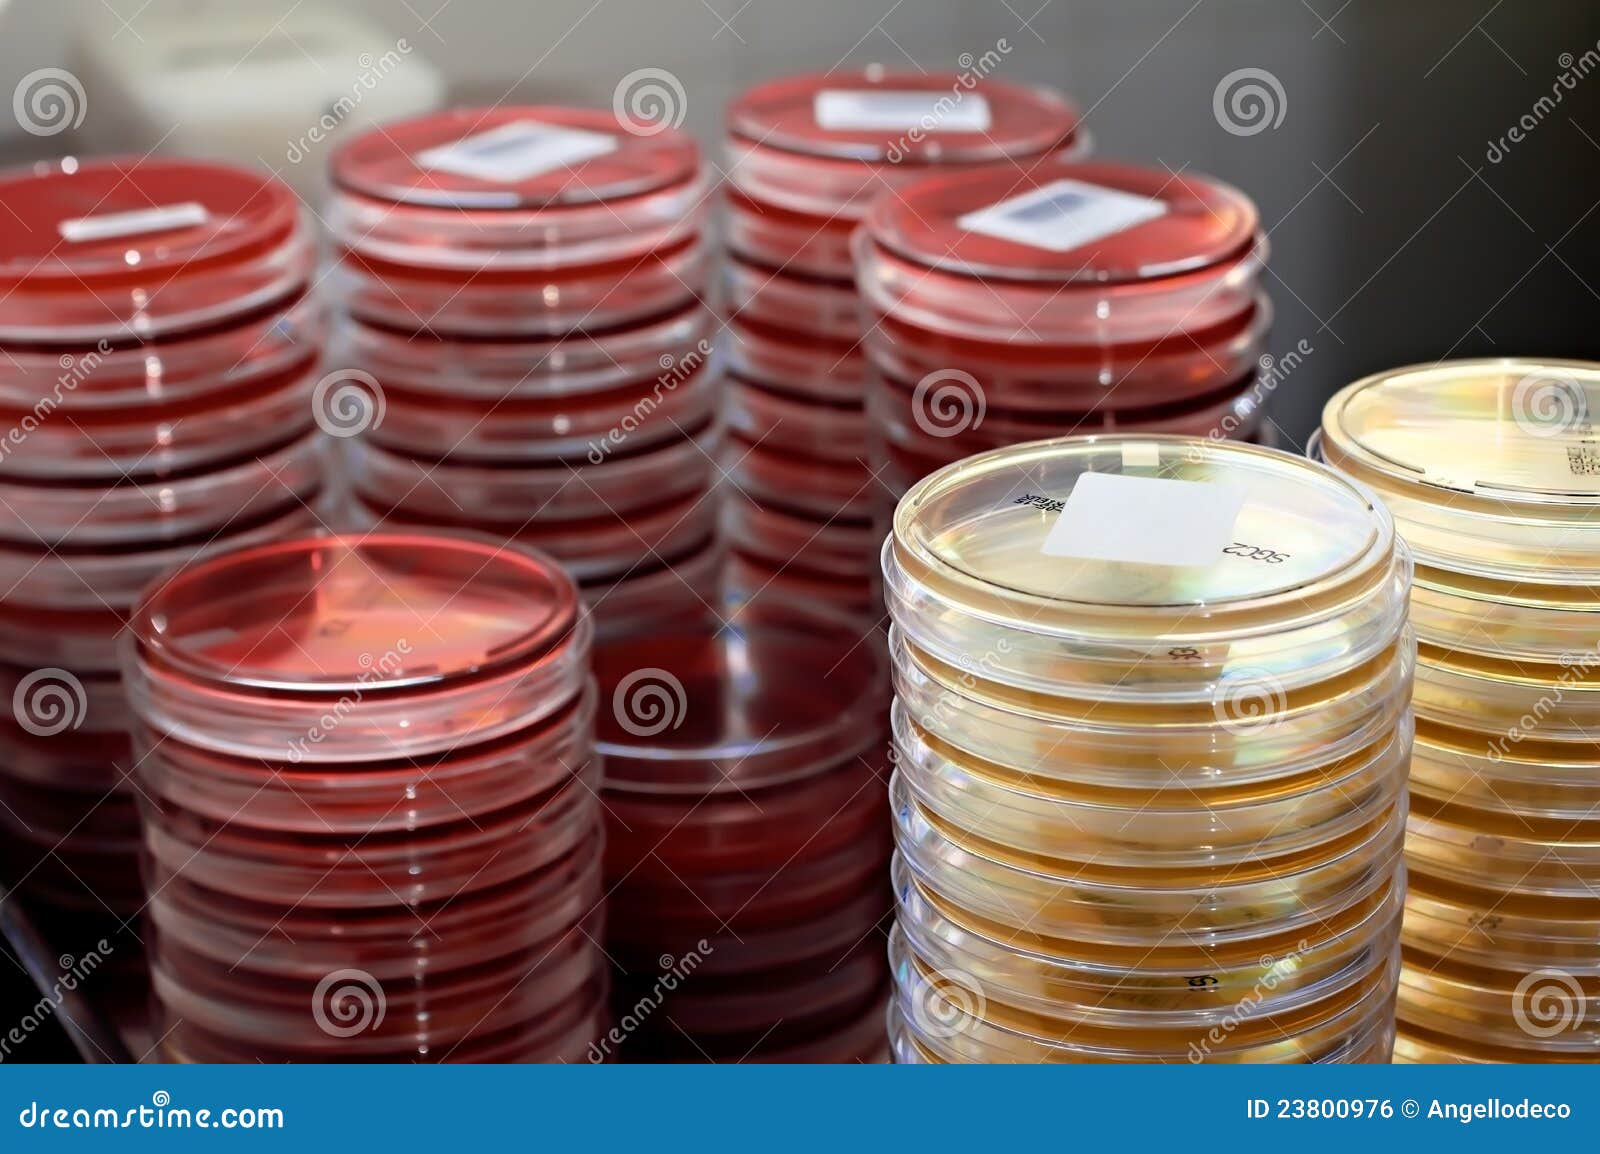 Plates With Culture Media Royalty Free Stock Image - Image: 23800976